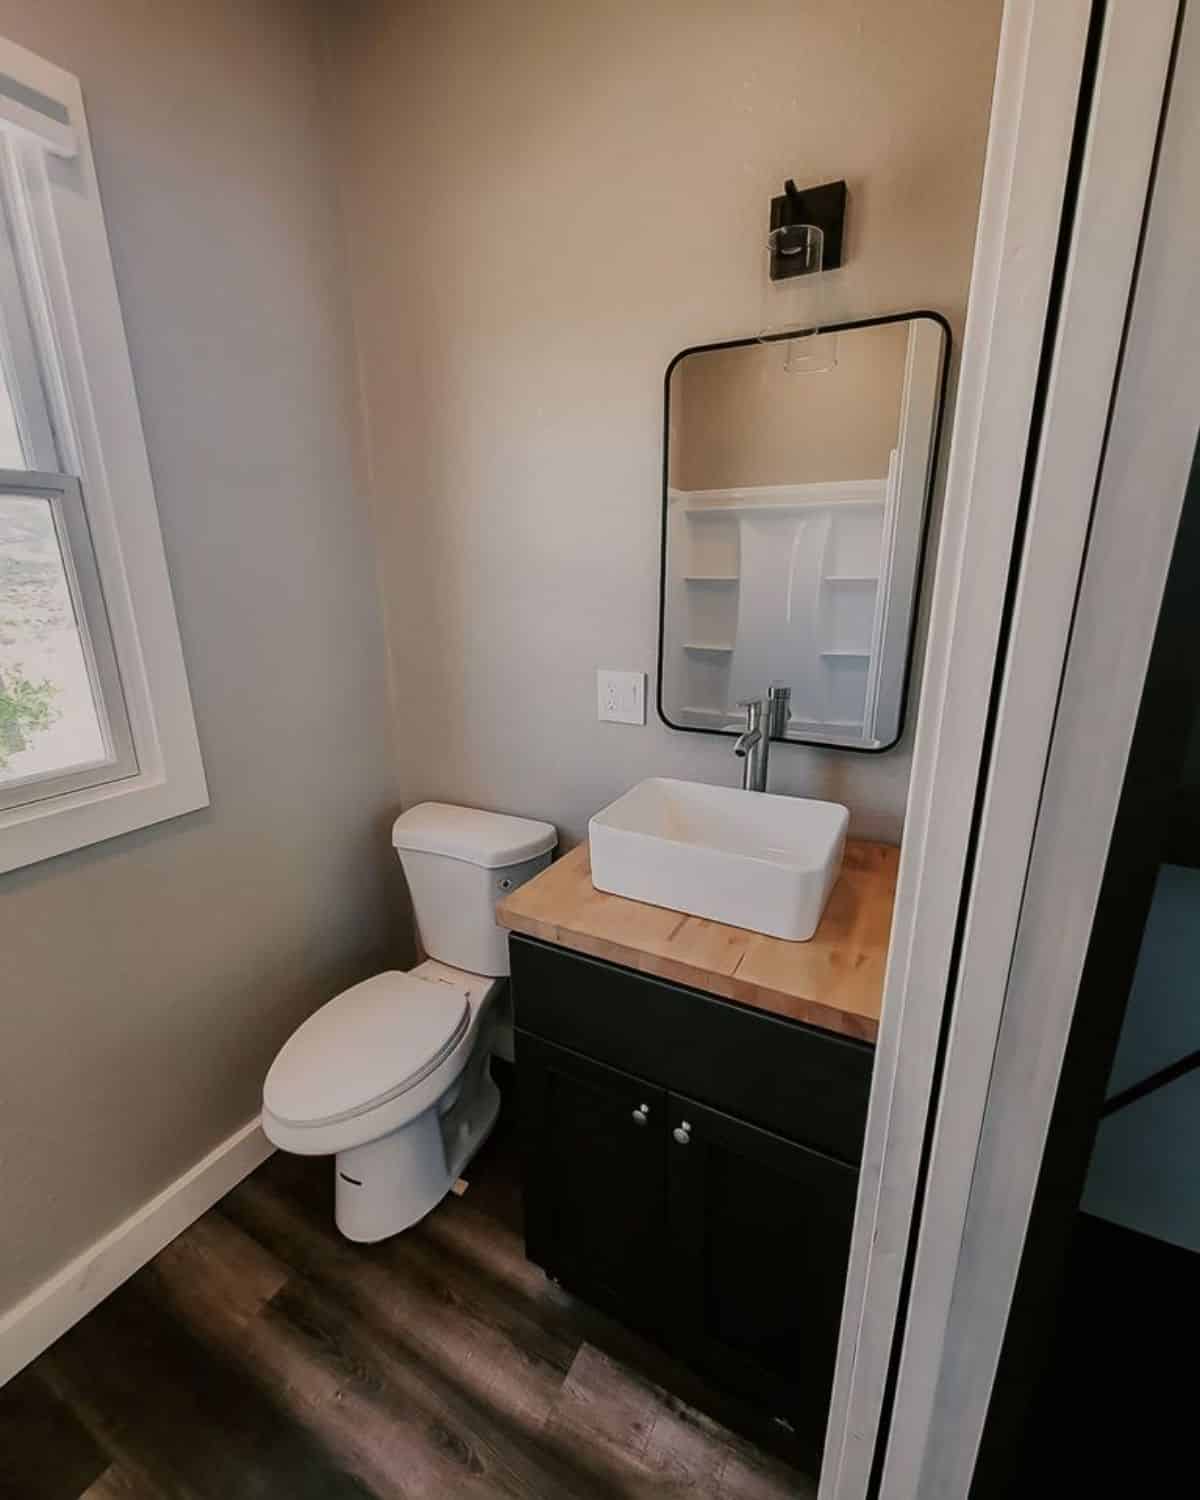 bathroom of 20’ tiny house on wheels has all the standard fittings